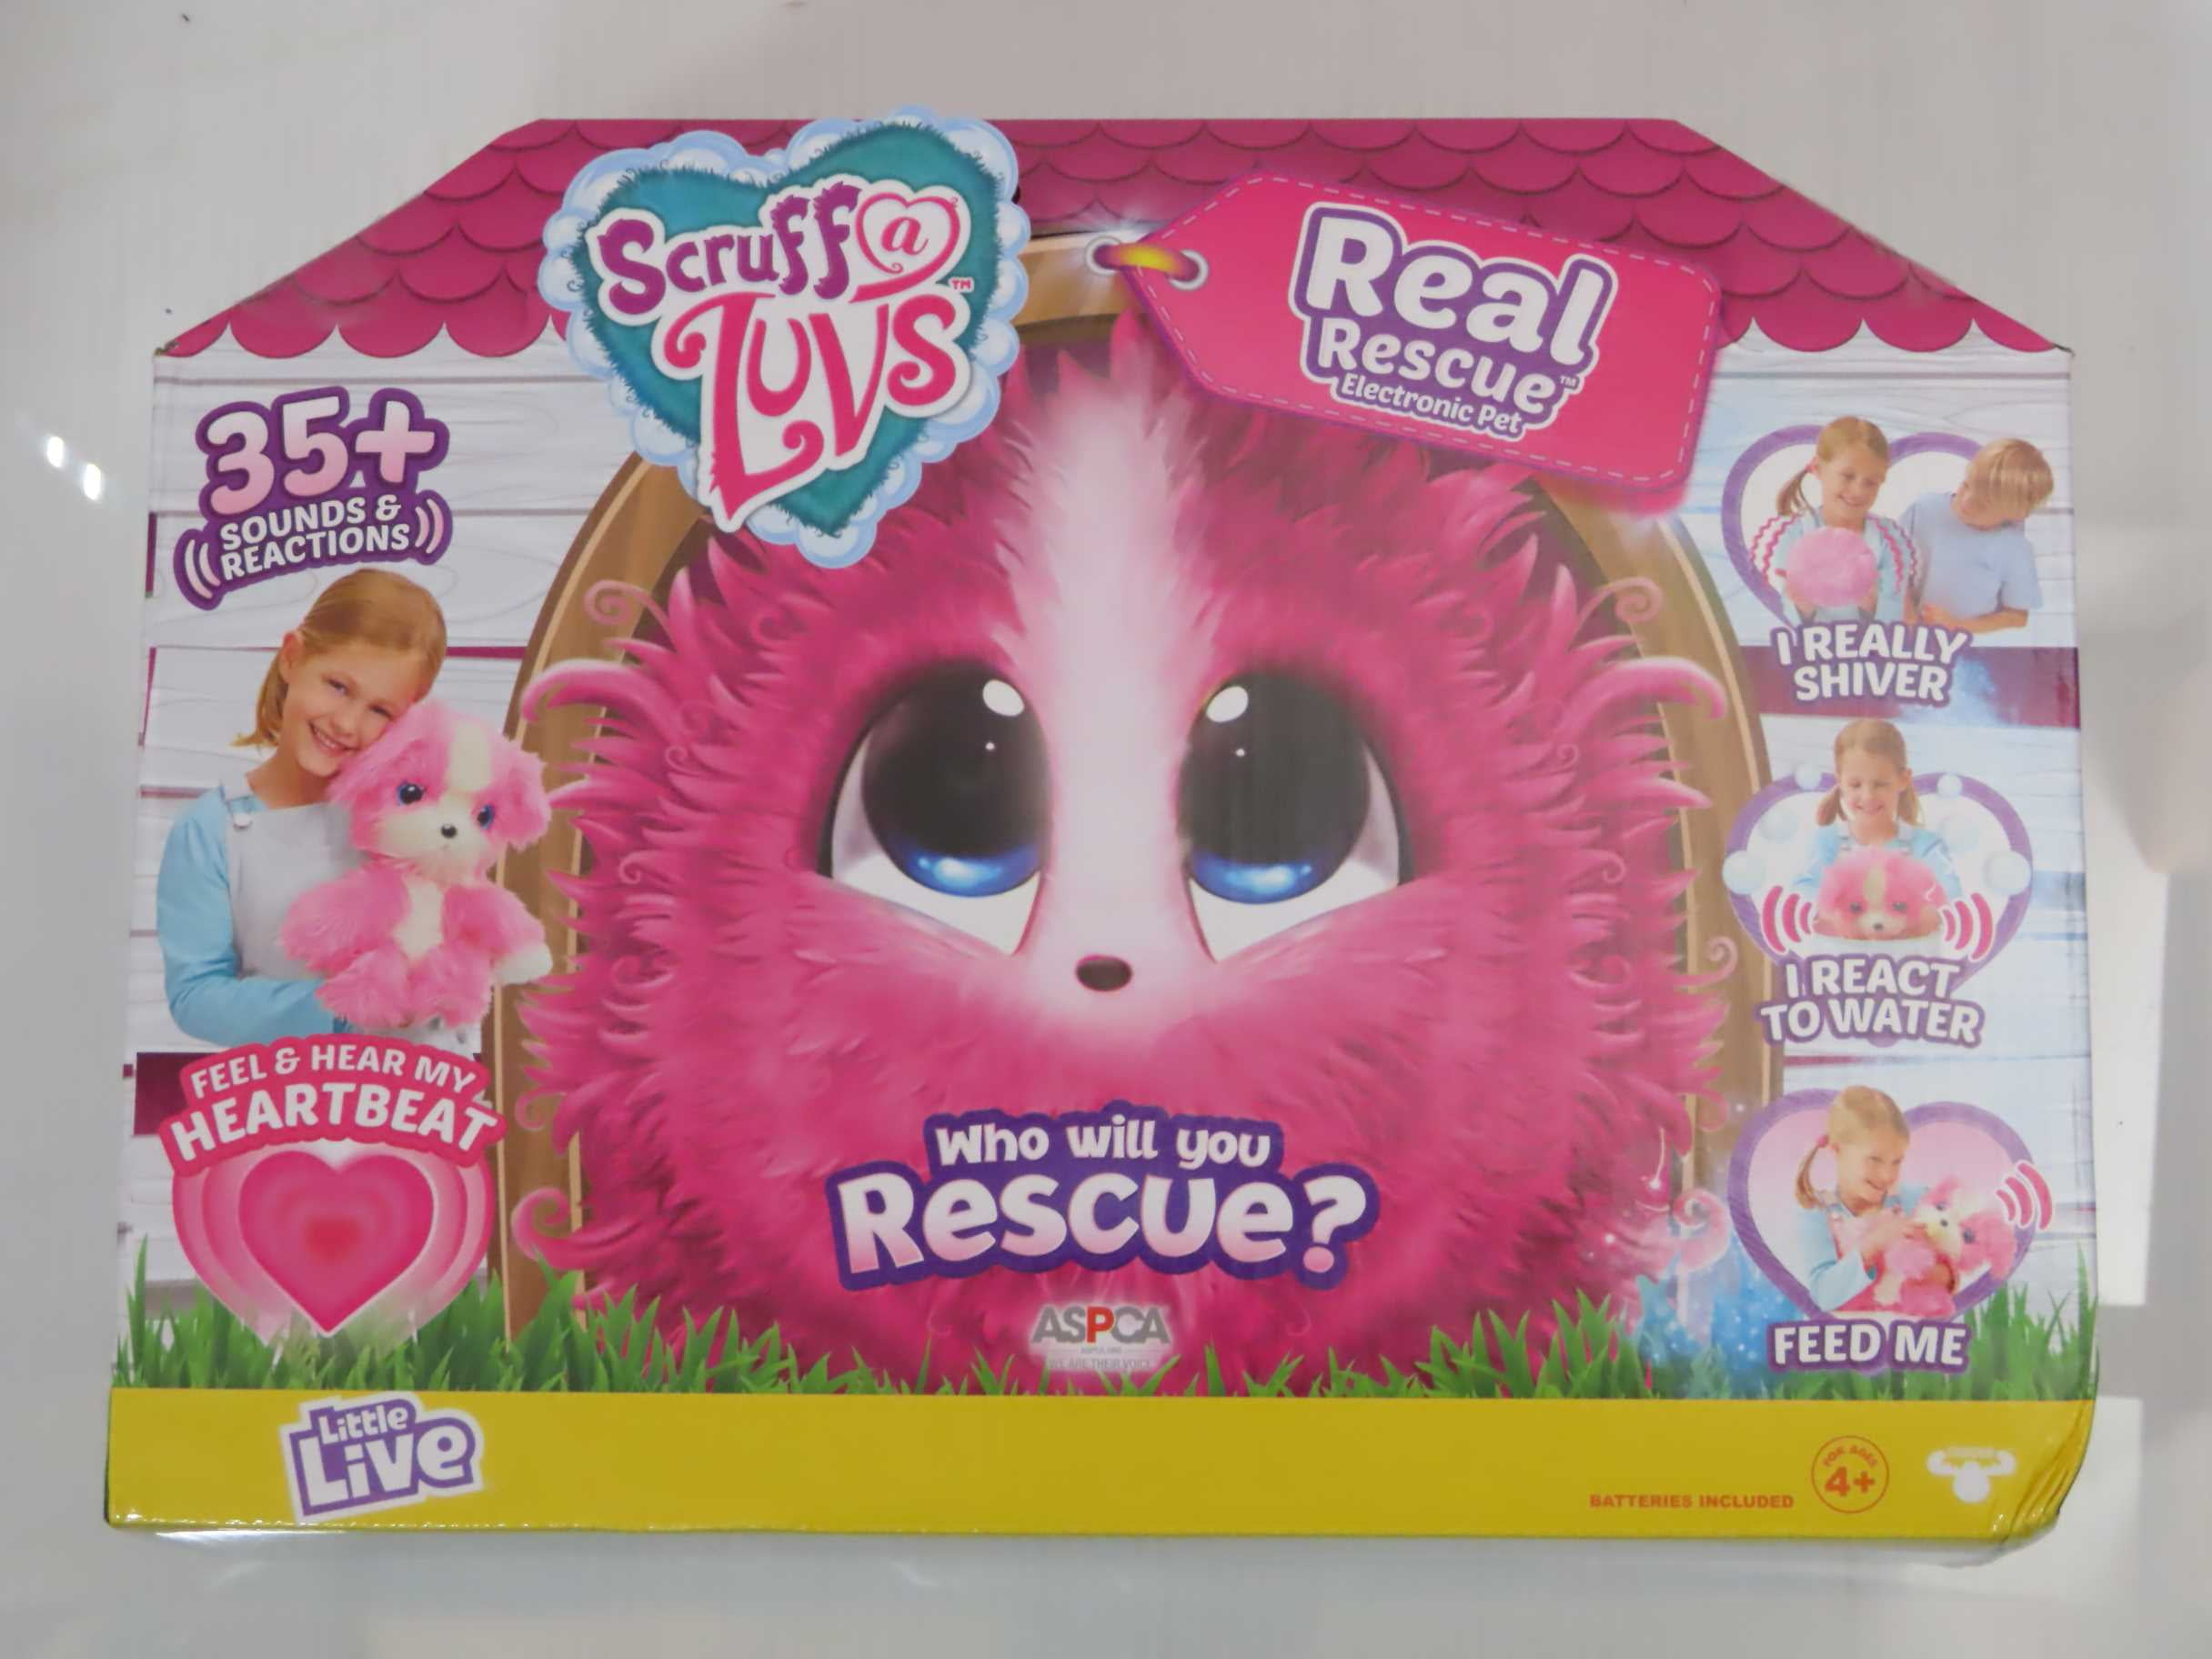 Details about   *Brand New* Scruff A Luvs Real Rescue Electronic Pet #30058 